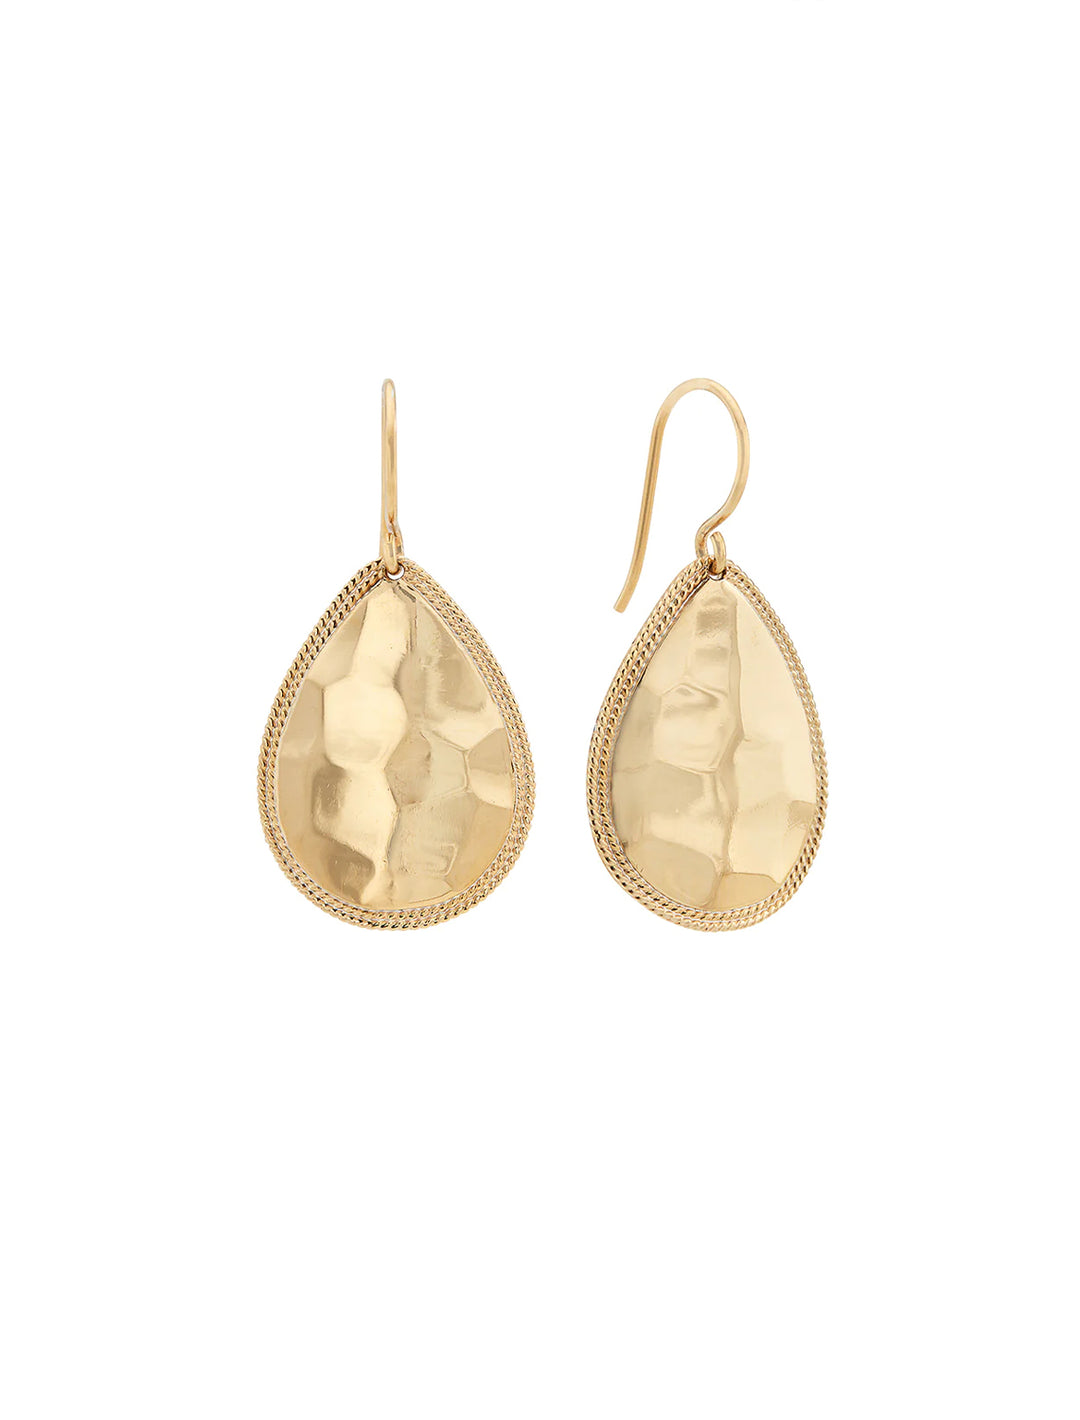 Front view of Anna Beck's medium hammered teardrop earrings in gold.